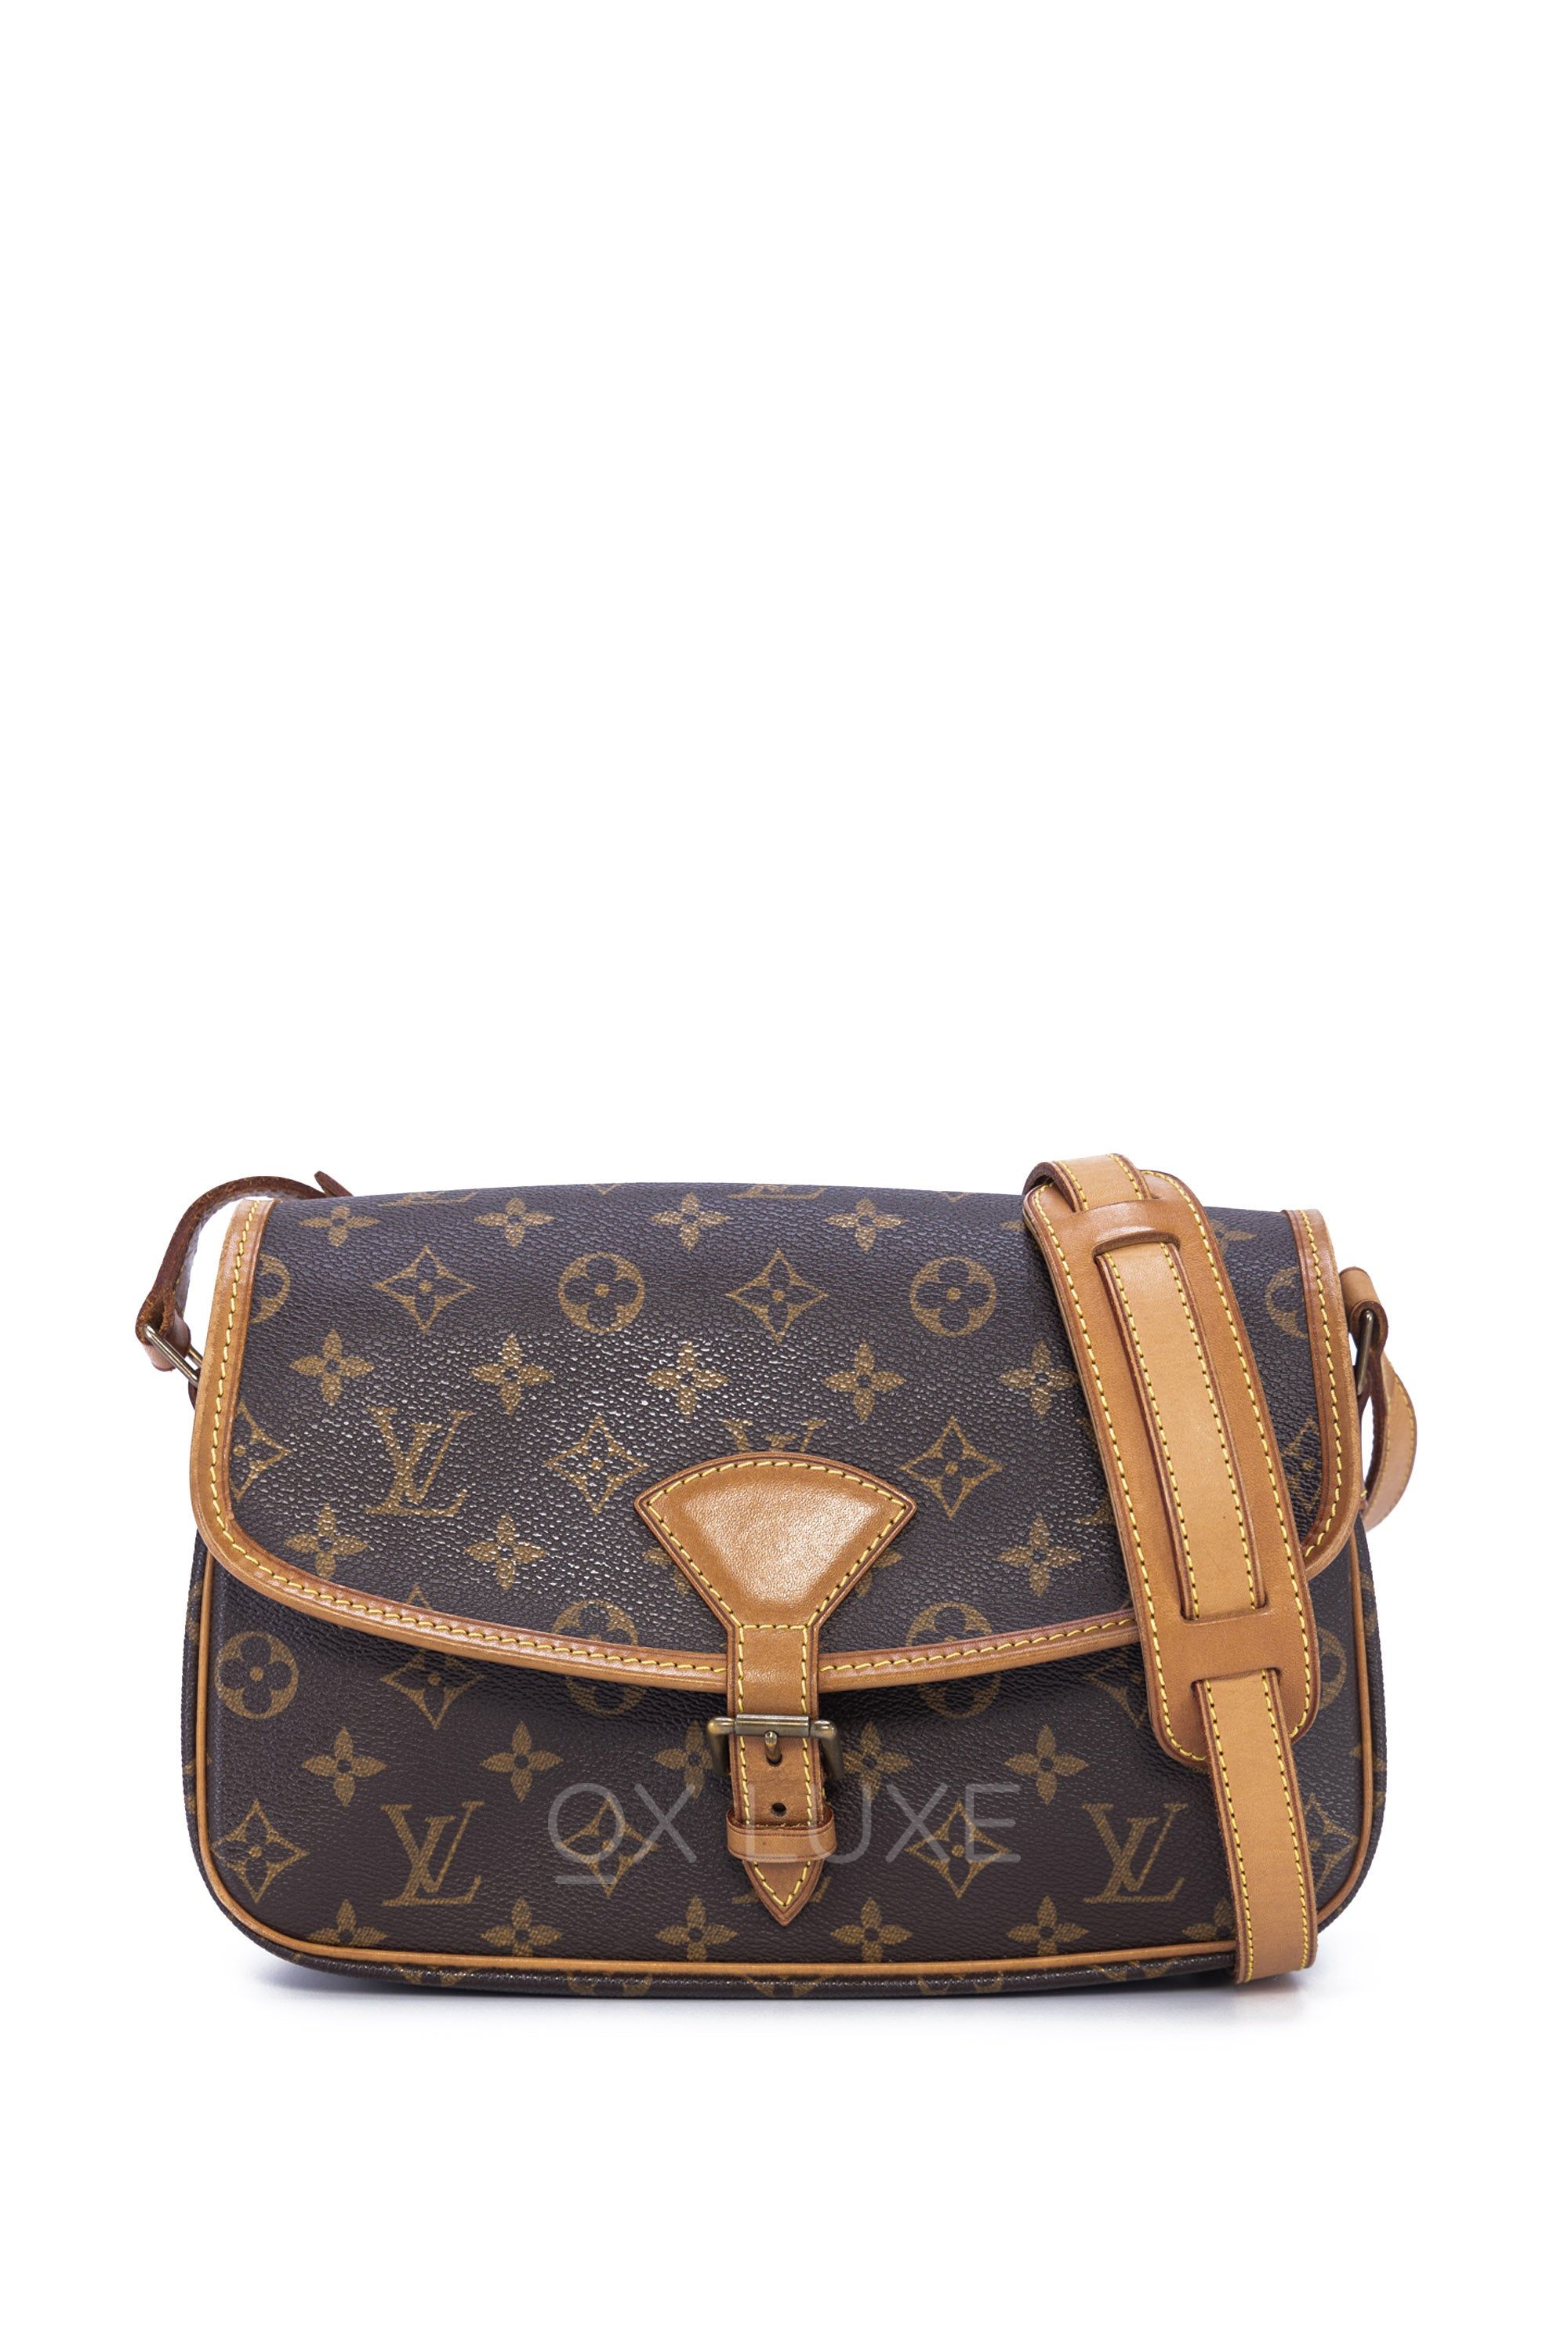 Louis Vuitton LV Sologne Crossbody Bag Monogram Coated Canvas M42250 oxluxe